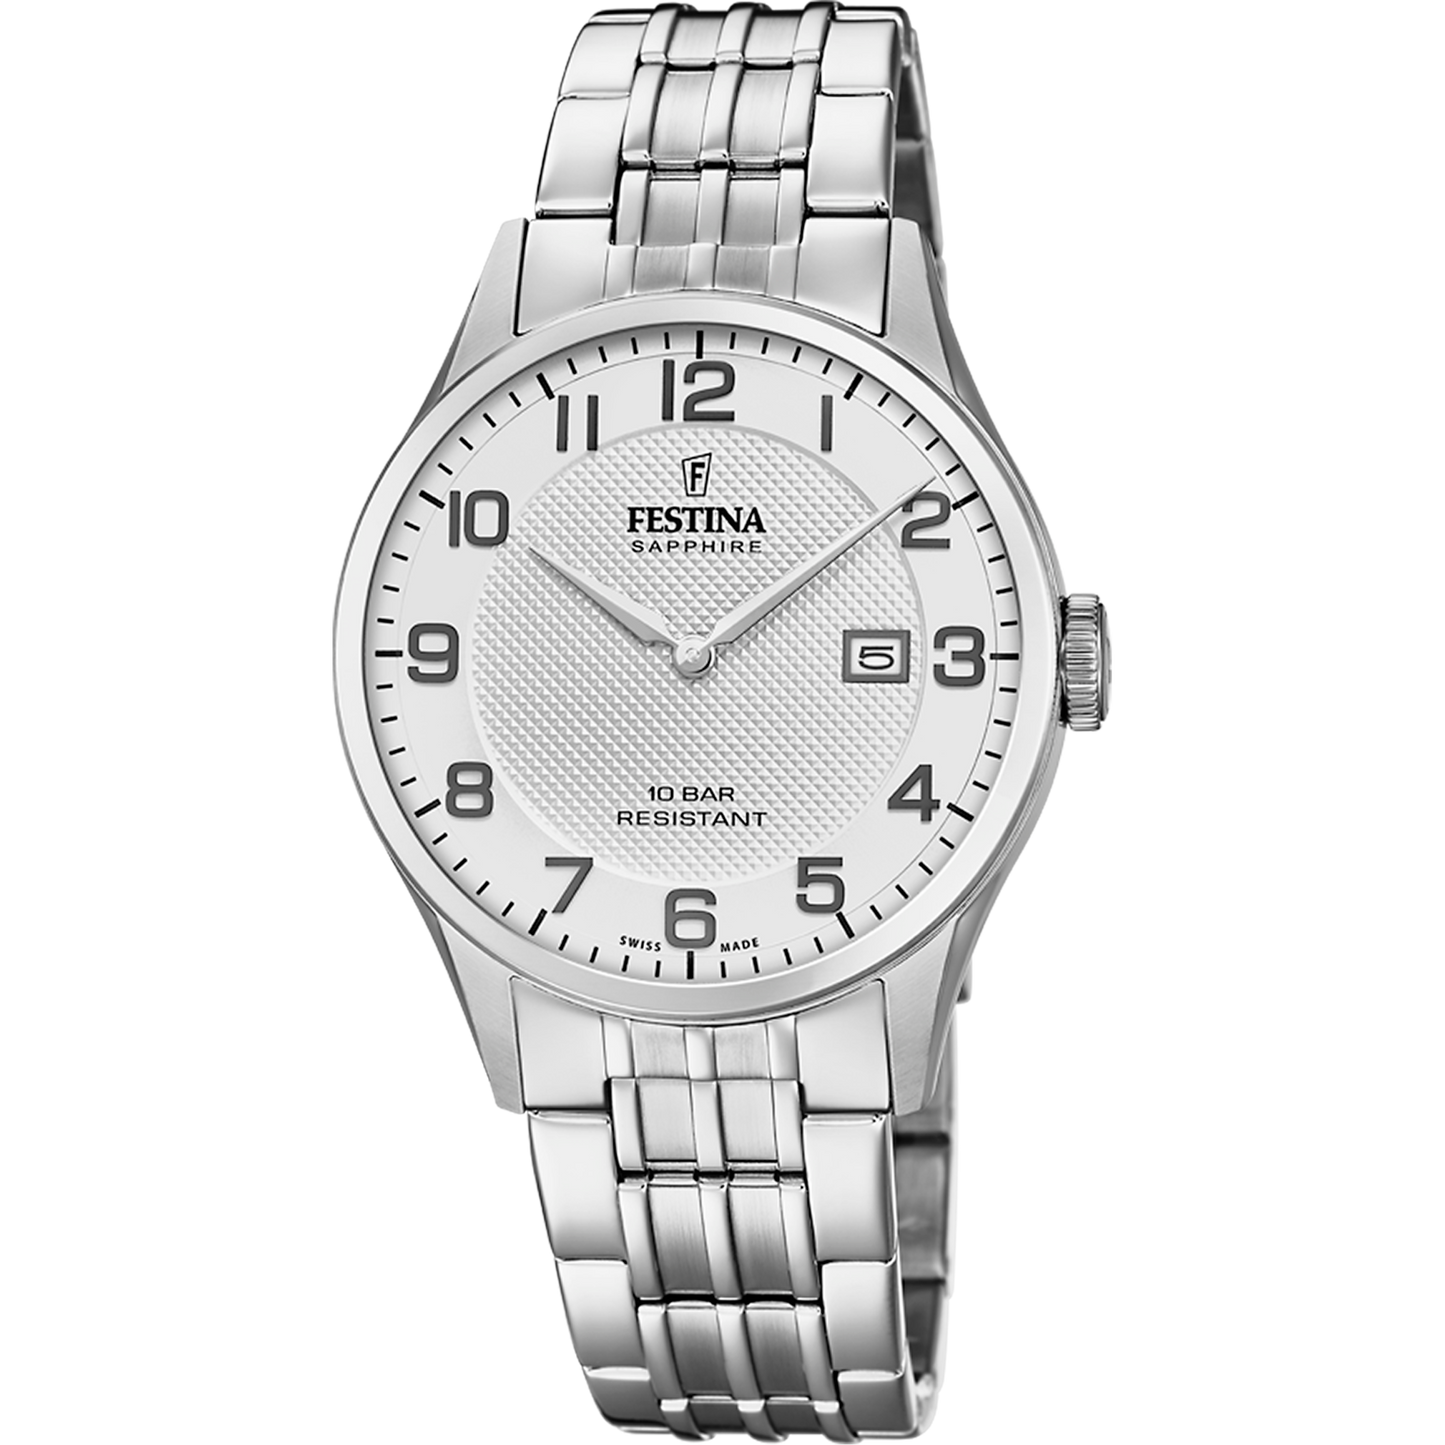 Festina Swiss Made F20005-1 - Analog - Strap Material Stainless Steel I Festina Watches USA